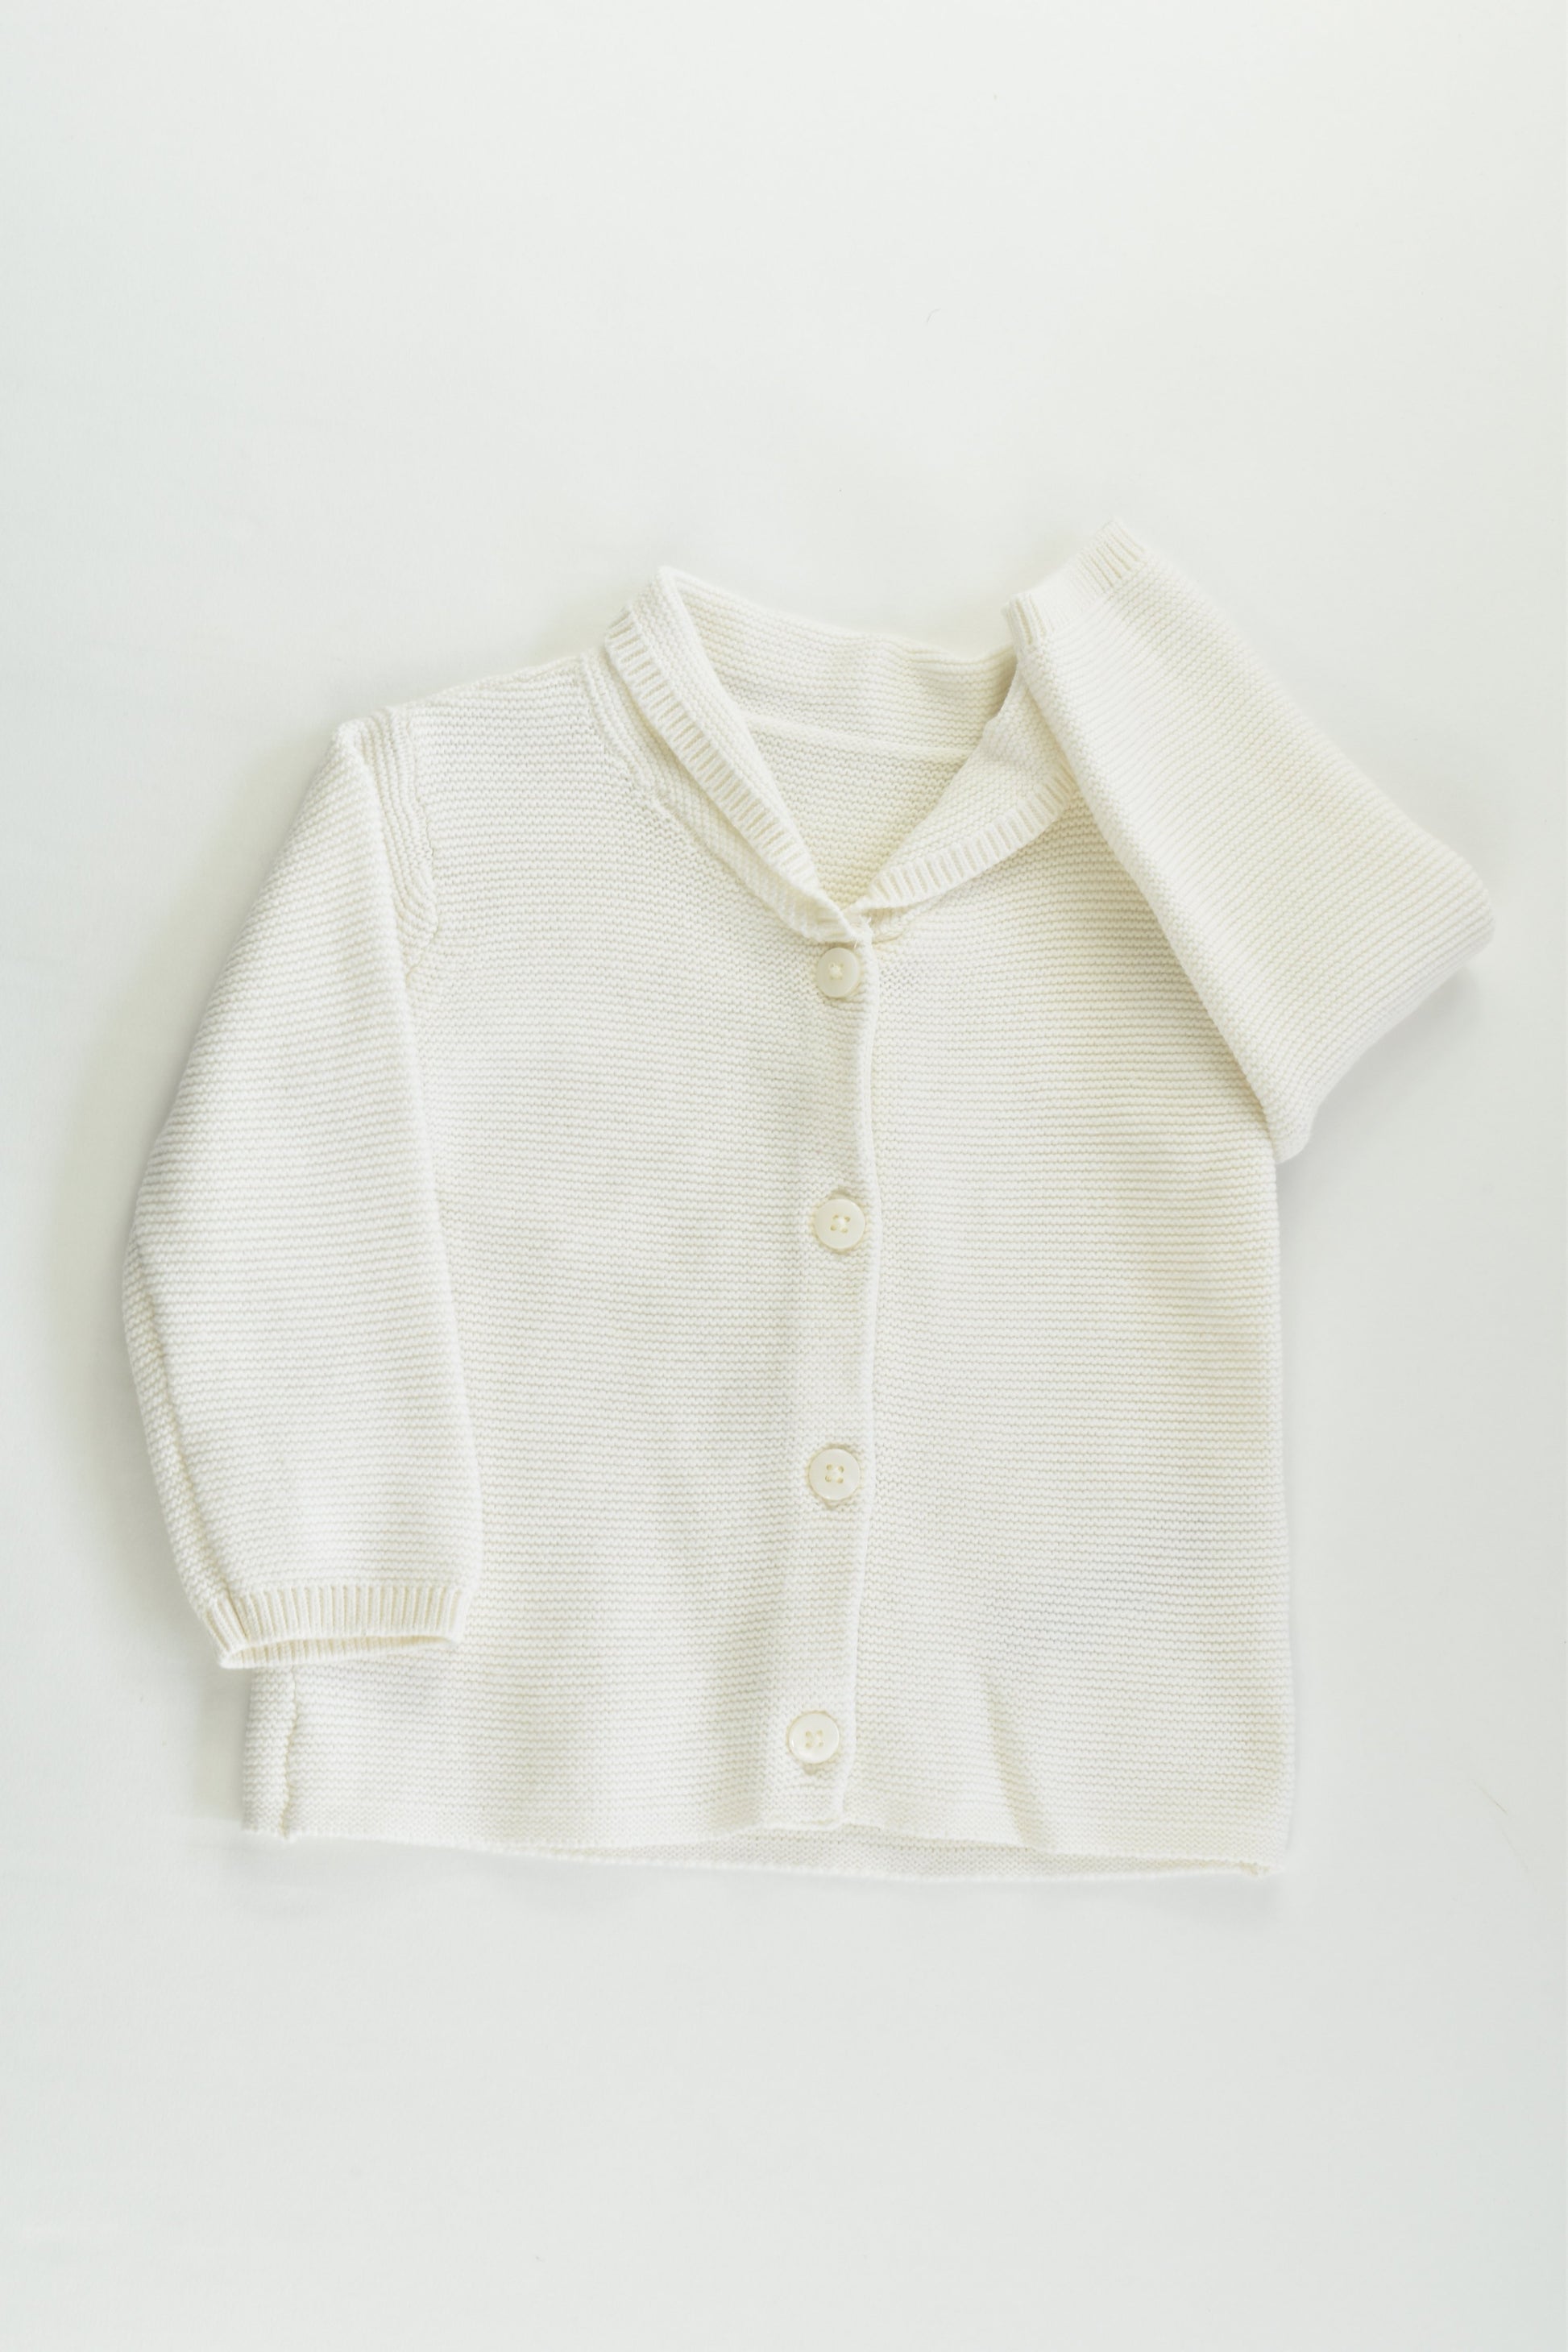 Marks & Spencer Size 00 (3-6 months) Knitted Cardigan